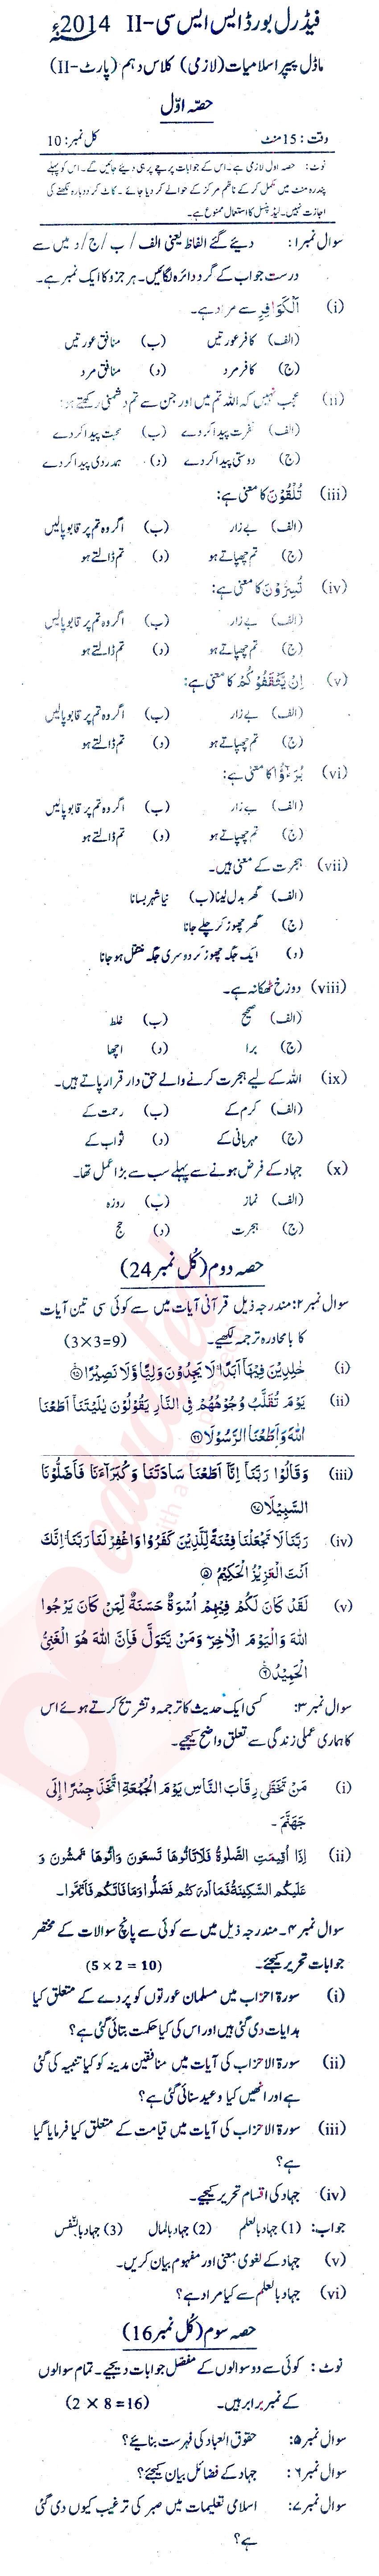 Islamiat (Compulsory) 10th class Past Paper Group 1 Federal BISE  2014